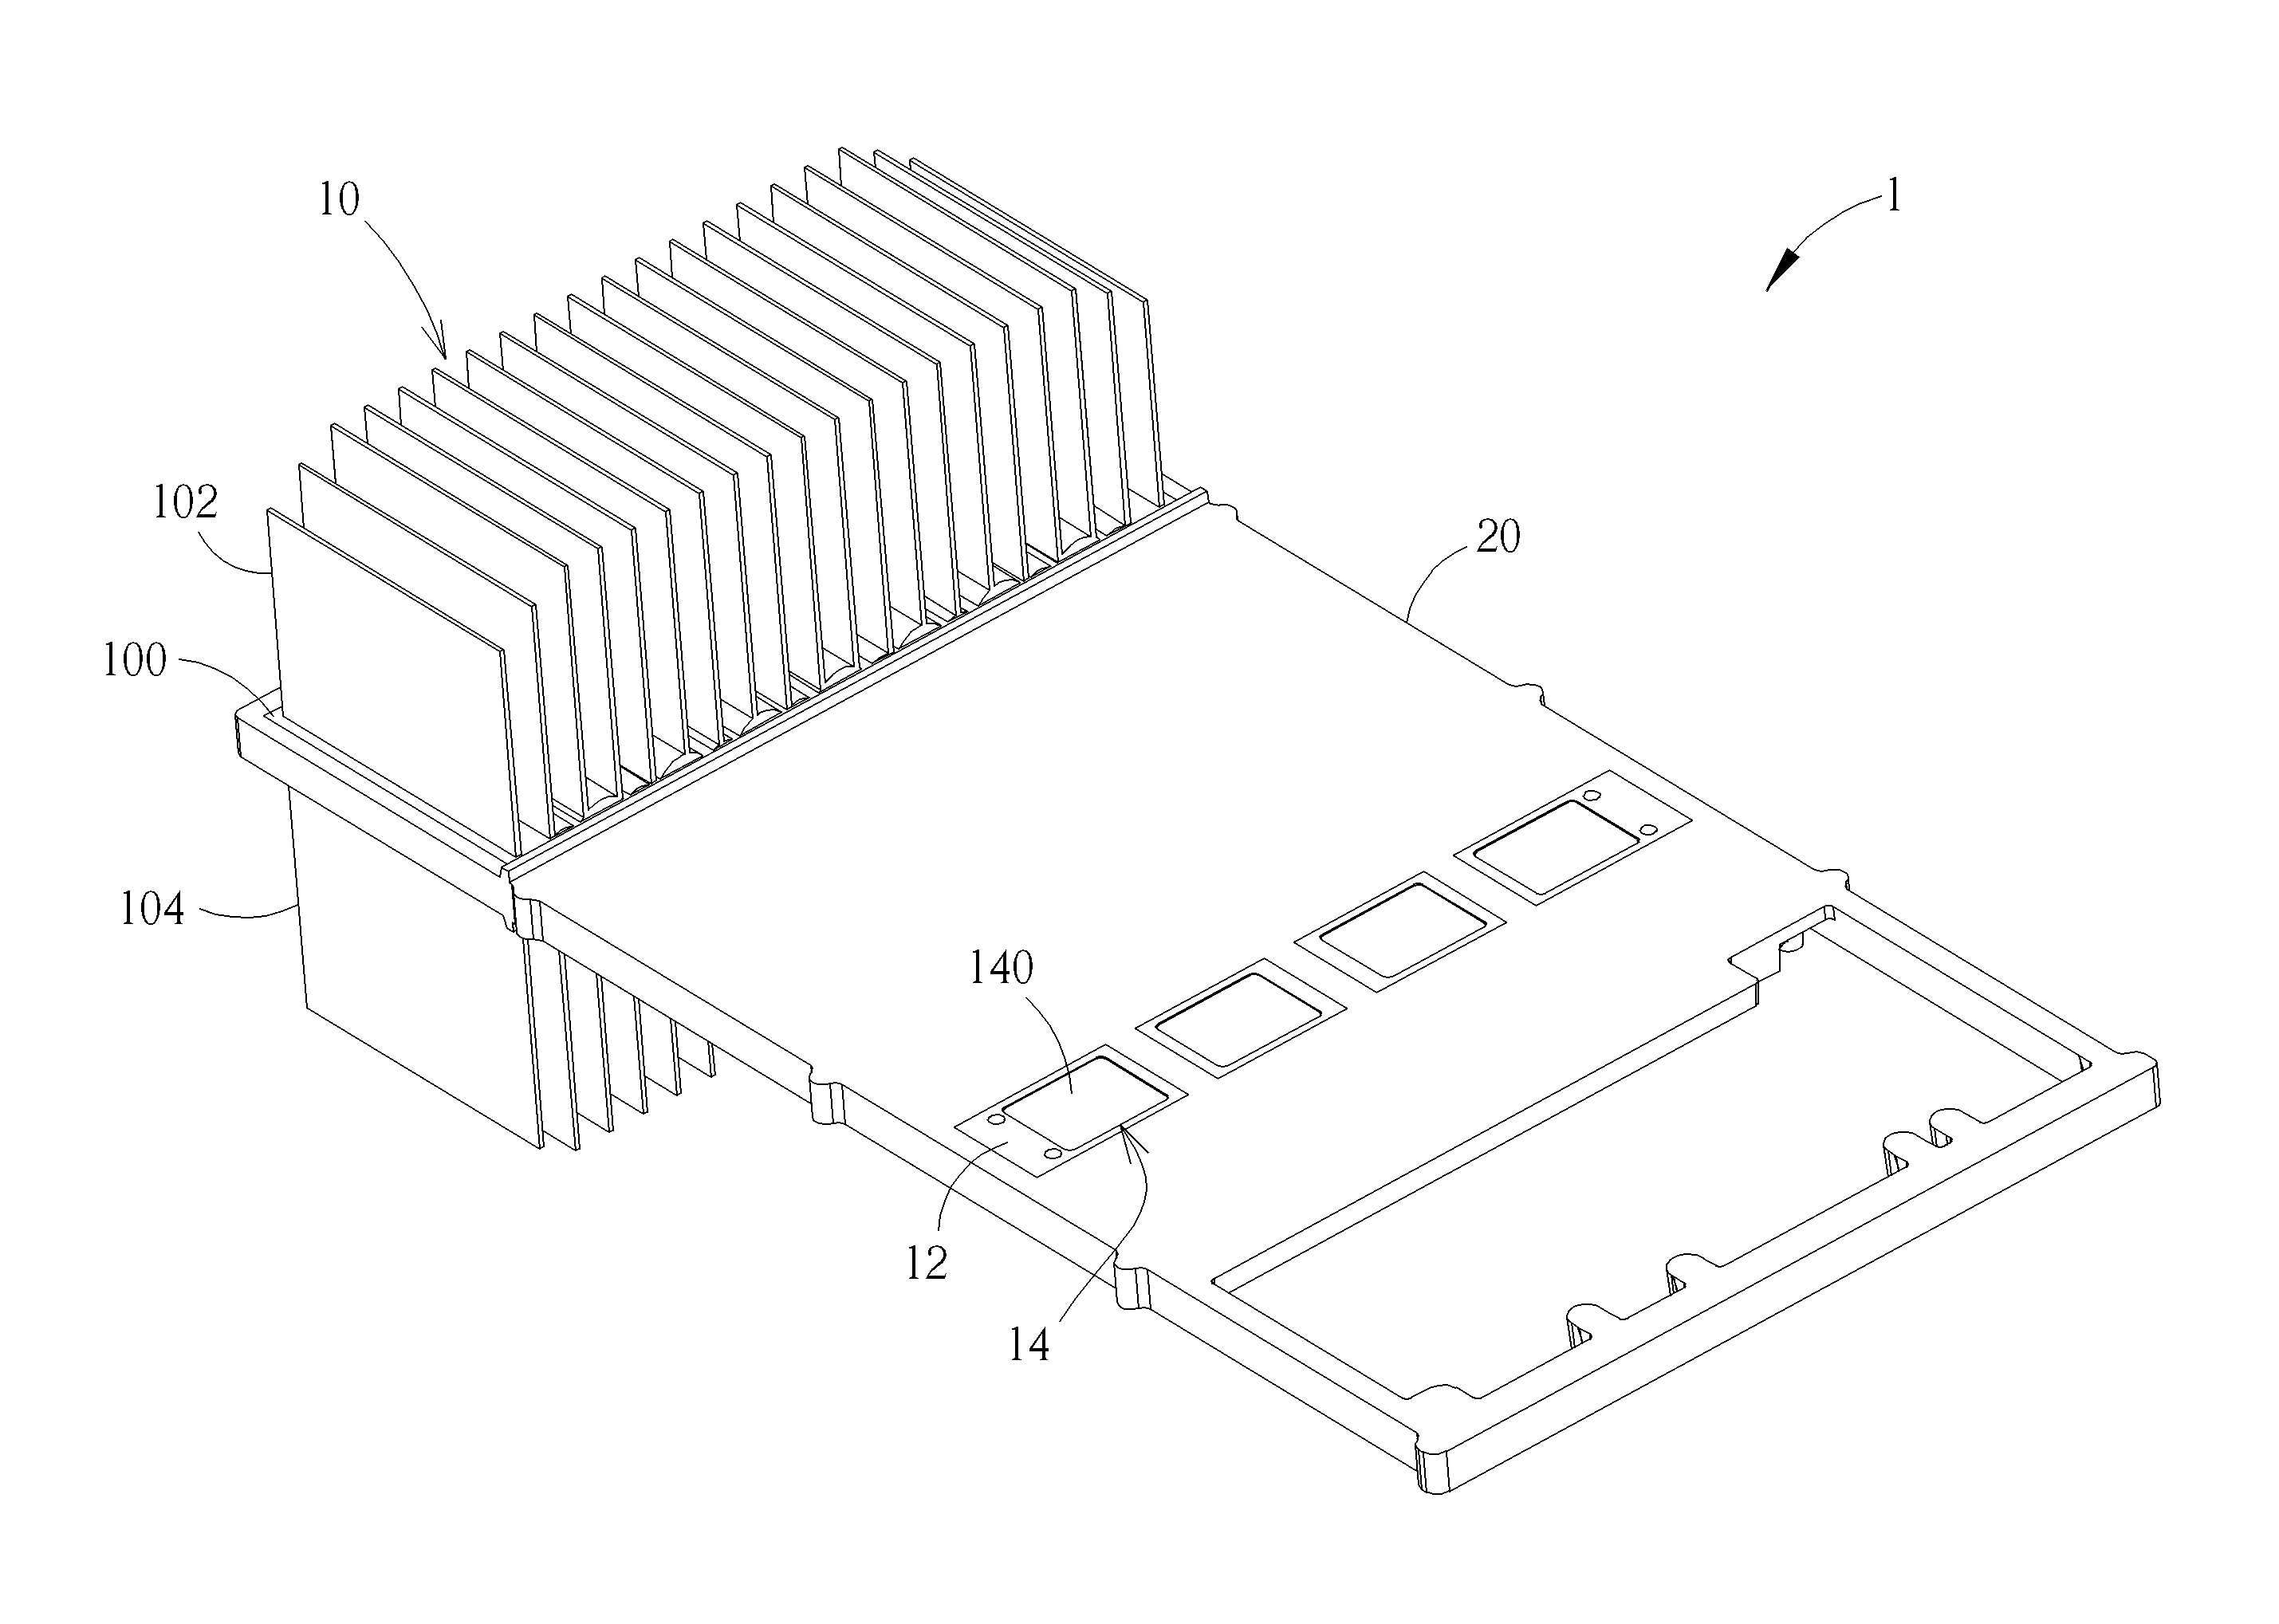 Heat dissipating device